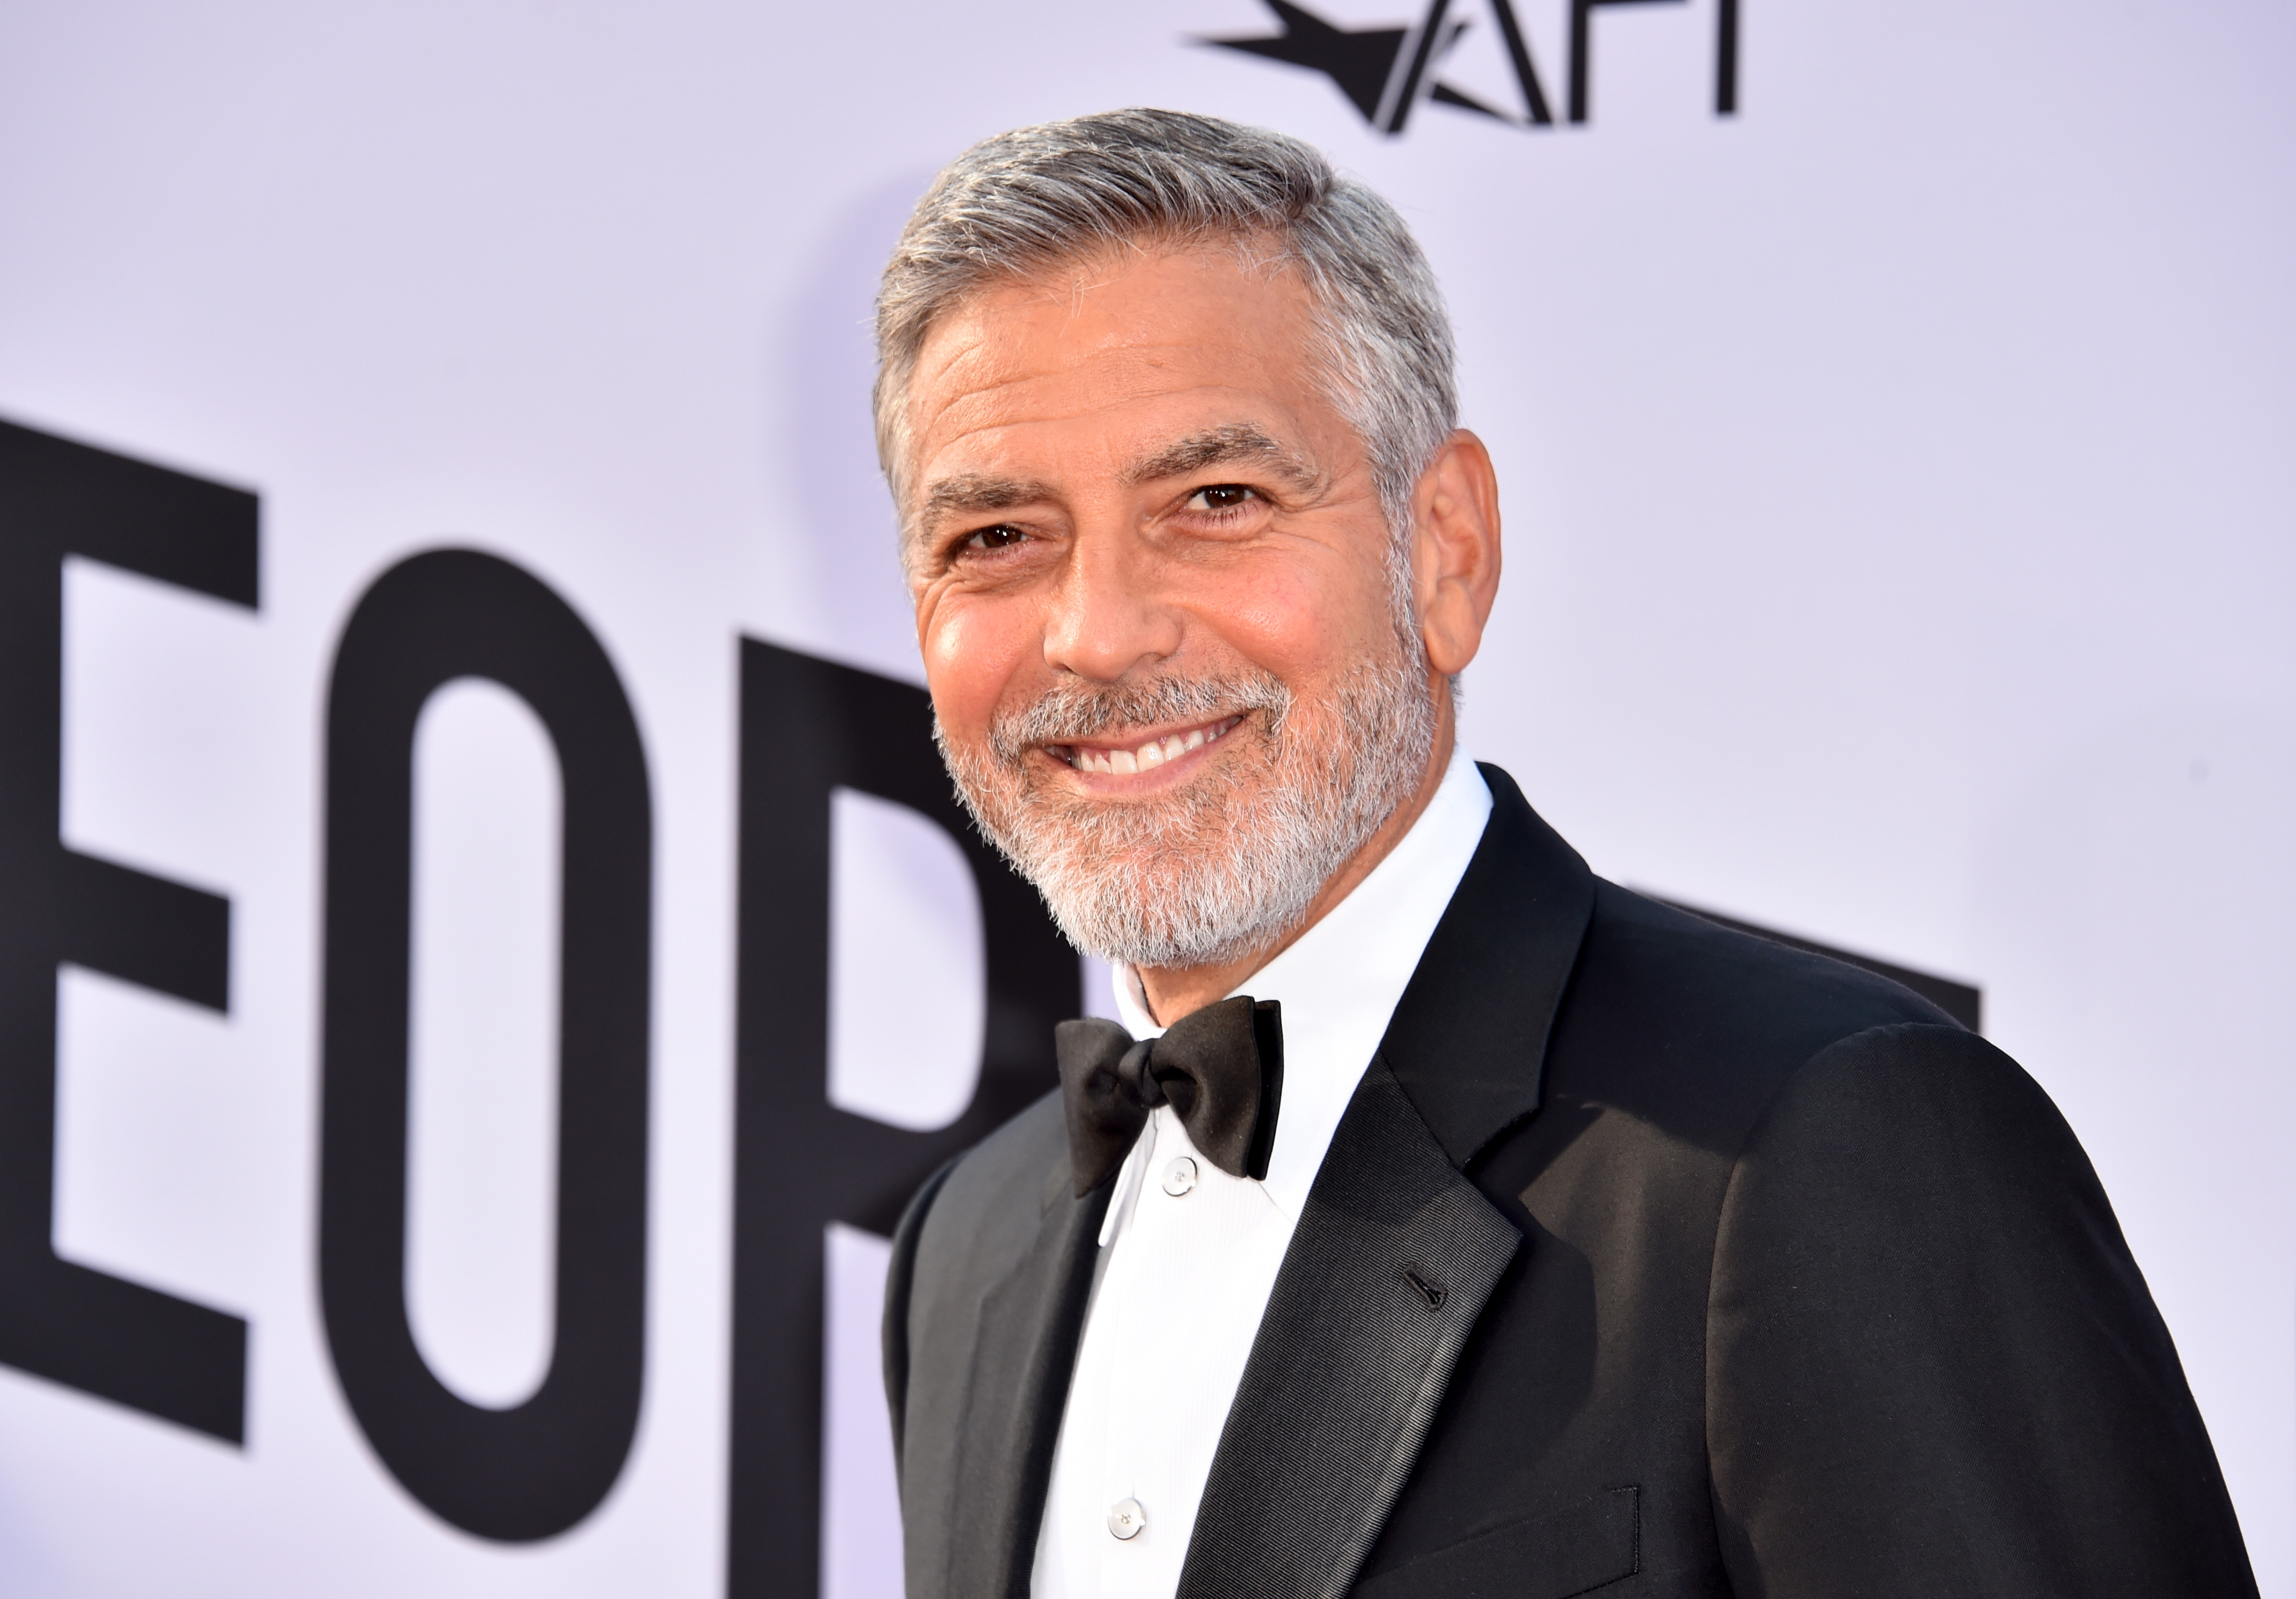 George Clooney smiling in a tuxedo at the American Film Institute's 46th Life Achievement Award Gala Tribute